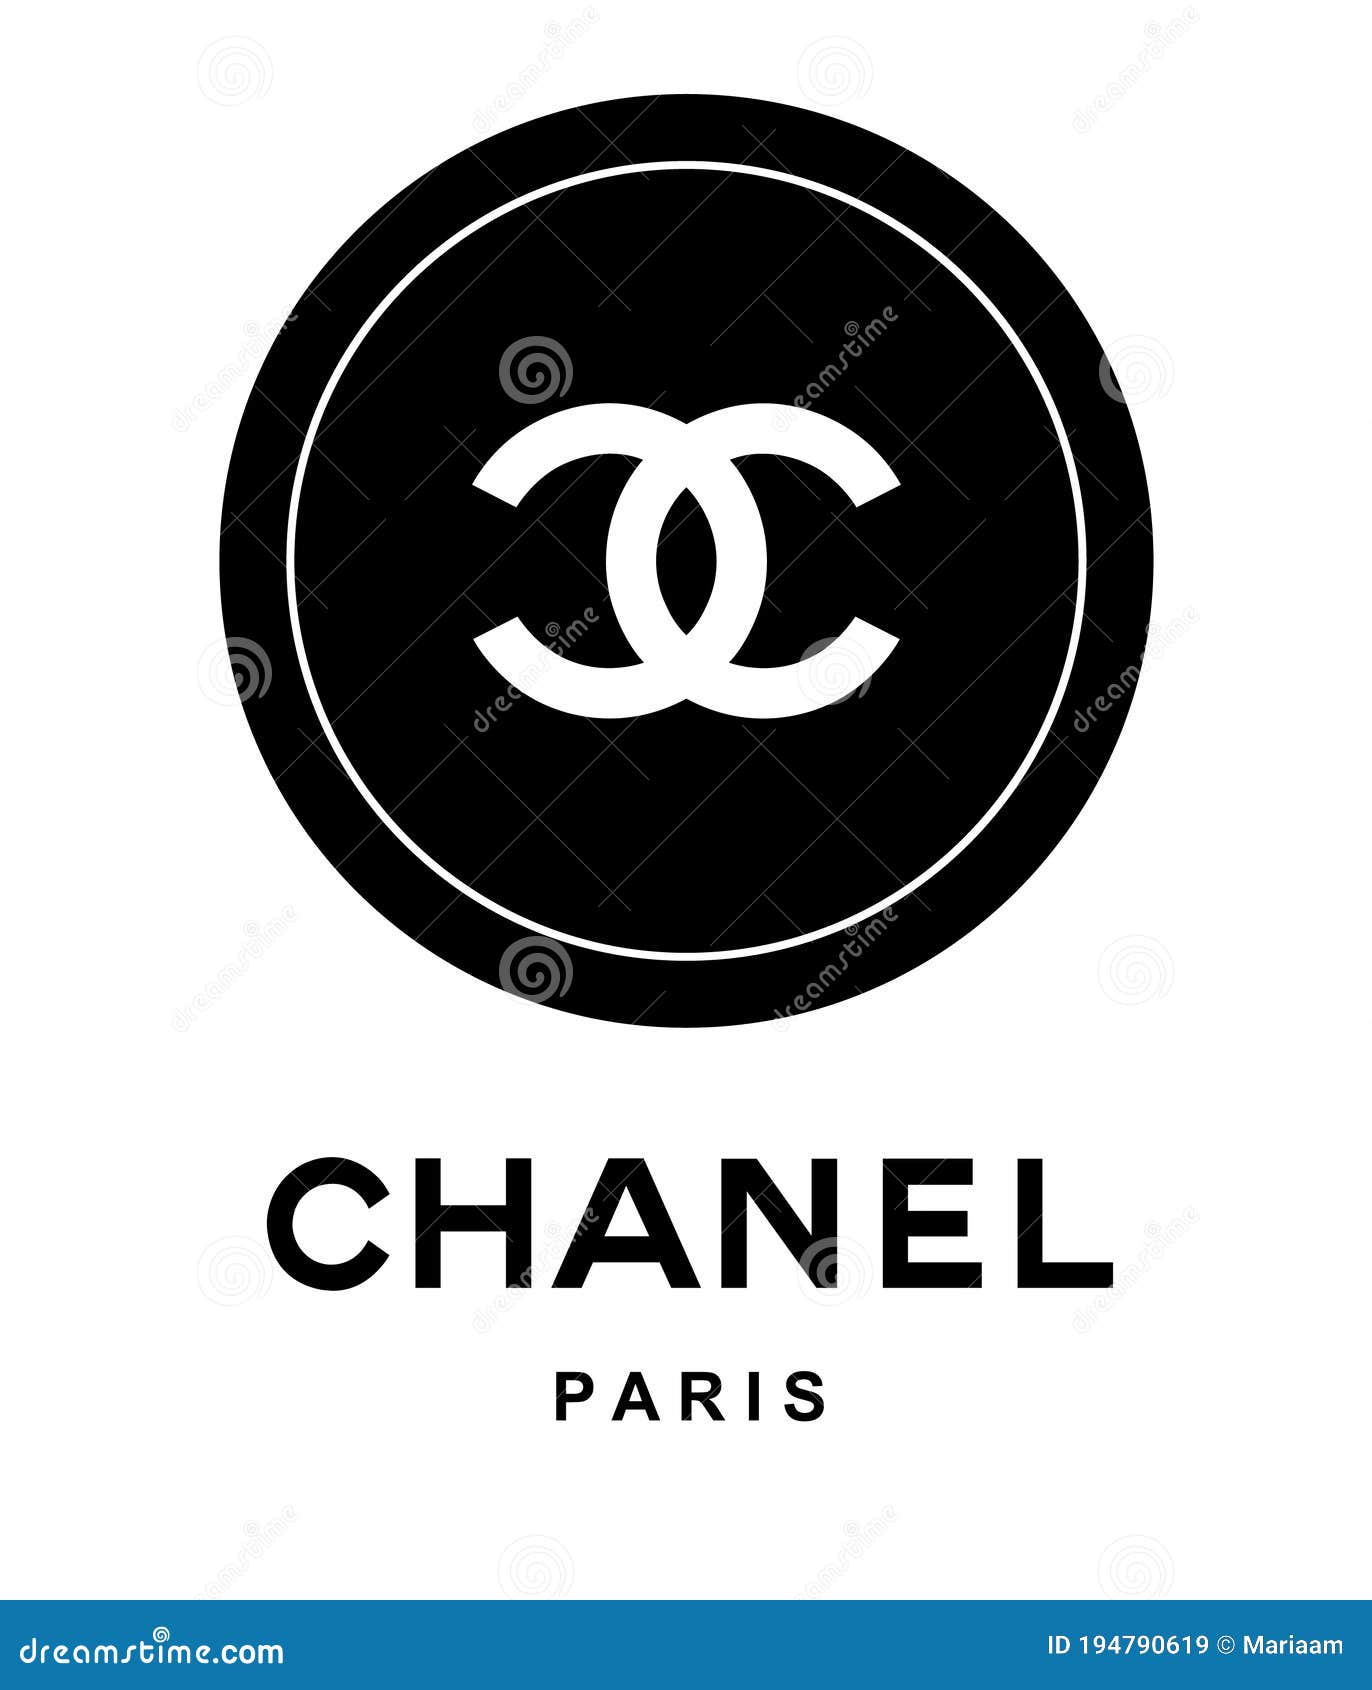 Coco Chanel Paris. Round Button with Chanel Logo Over White. Clean Design.  Editorial Stock Image - Illustration of paris, background: 194790619